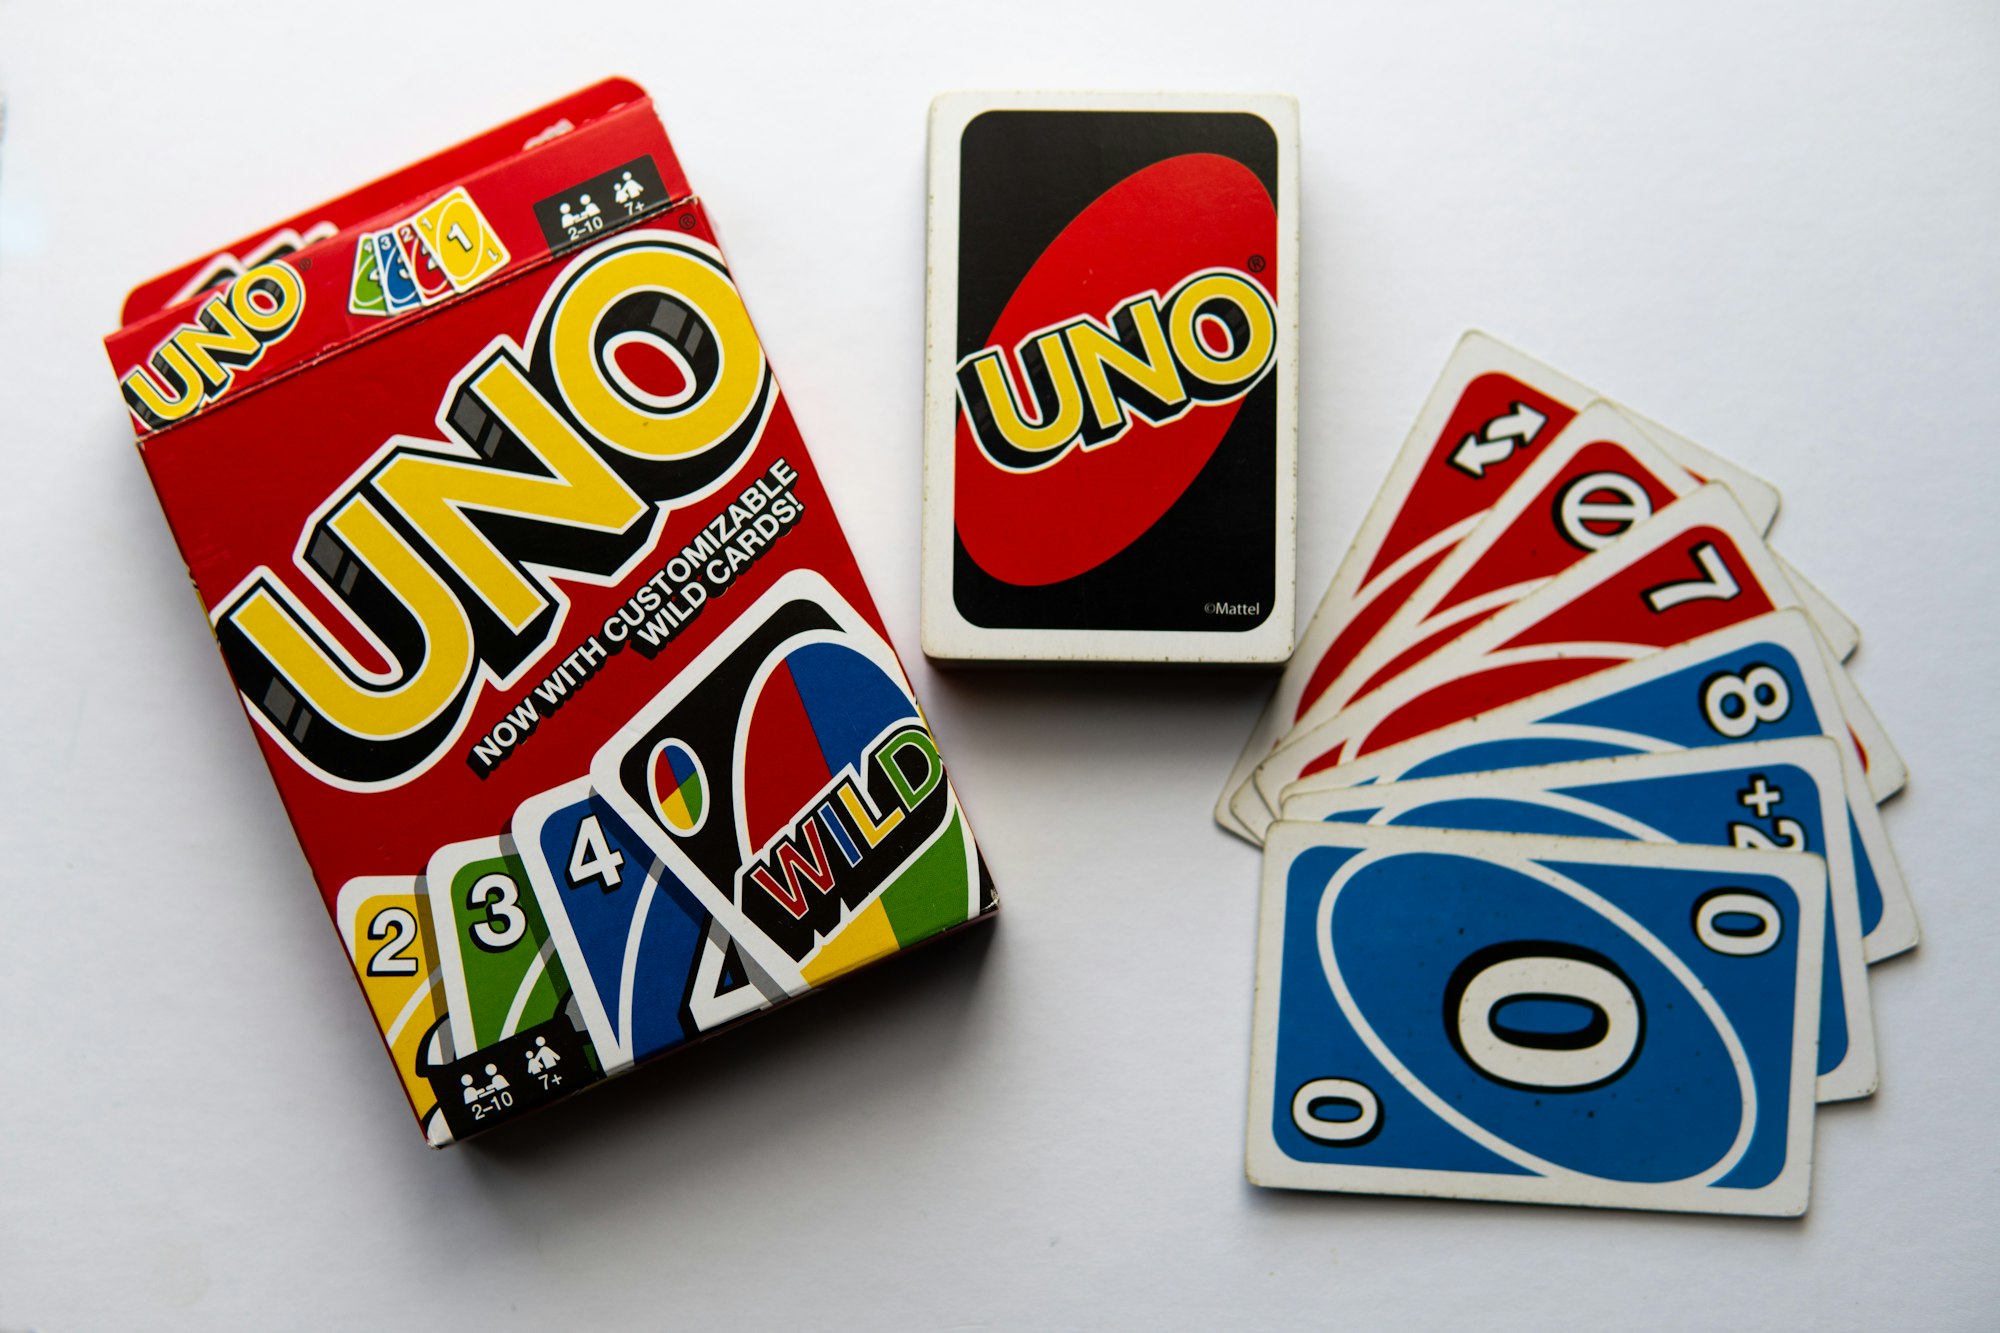 Commands to play Uno